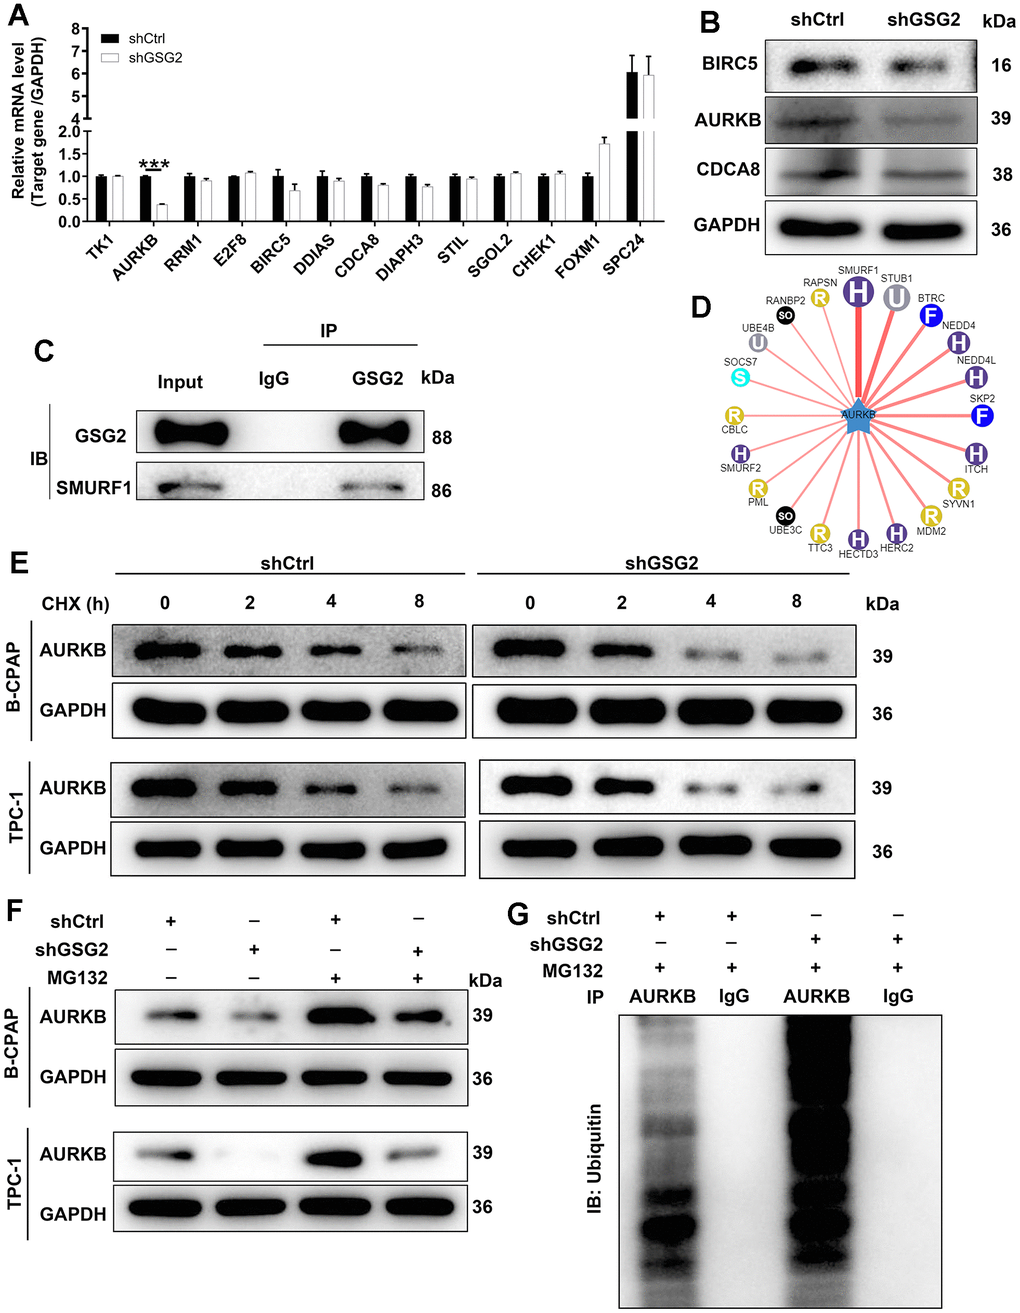 The exploration of downstream mechanism of GSG2-regulating thyroid cancer. (A) The mRNA levels of top 13 co-expressed genes of GSG2 were detected through qRT-PCR experiment. (B) The protein levels of BIRC5, AURKB and CDCA8 were analyzed in response to GSG2 downregulation by western blot. (C) Co-IP assay demonstrated an endogenous interaction between GSG2 and SMURF1. (D) The E3 ubiquitin ligases of AURKB. (E) The half-life of AURKB protein in GSG2-depleted B-CPAP and TPC-1 cells was assessed at 2 h, 4 h and 8h following 0.2 mg/mL CHX treatment. (F) After MG-132 addition, AURKB protein levels in GSG2-depleted B-CPAP and TPC-1 cells were measured. (G) The ubiquitination level of AURKB was detected in GSG2-depleted B-CPAP cells after immunoprecipitation using AURKB or IgG antibodies.